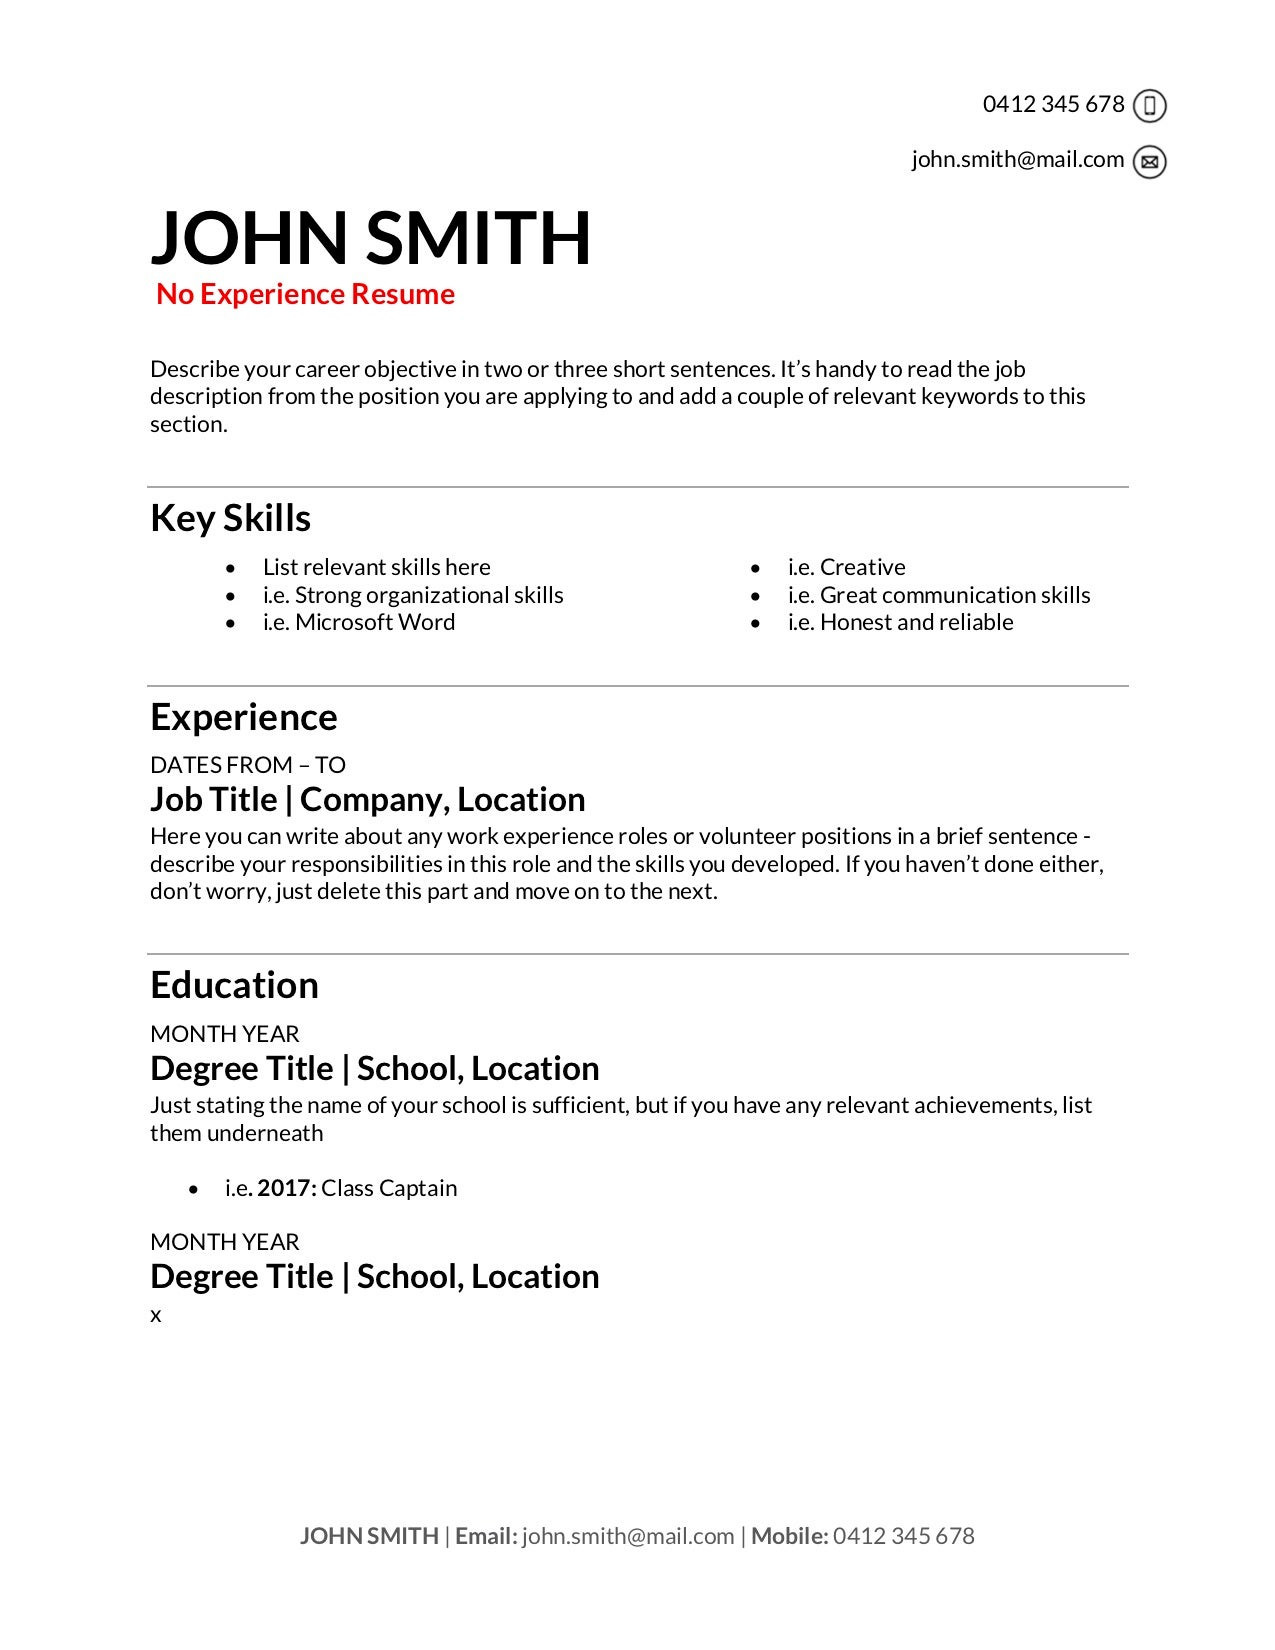 Volunteers for Youth Justice Resume Sample Free Resume Templates [download]: How to Write A Resume In 2022 …